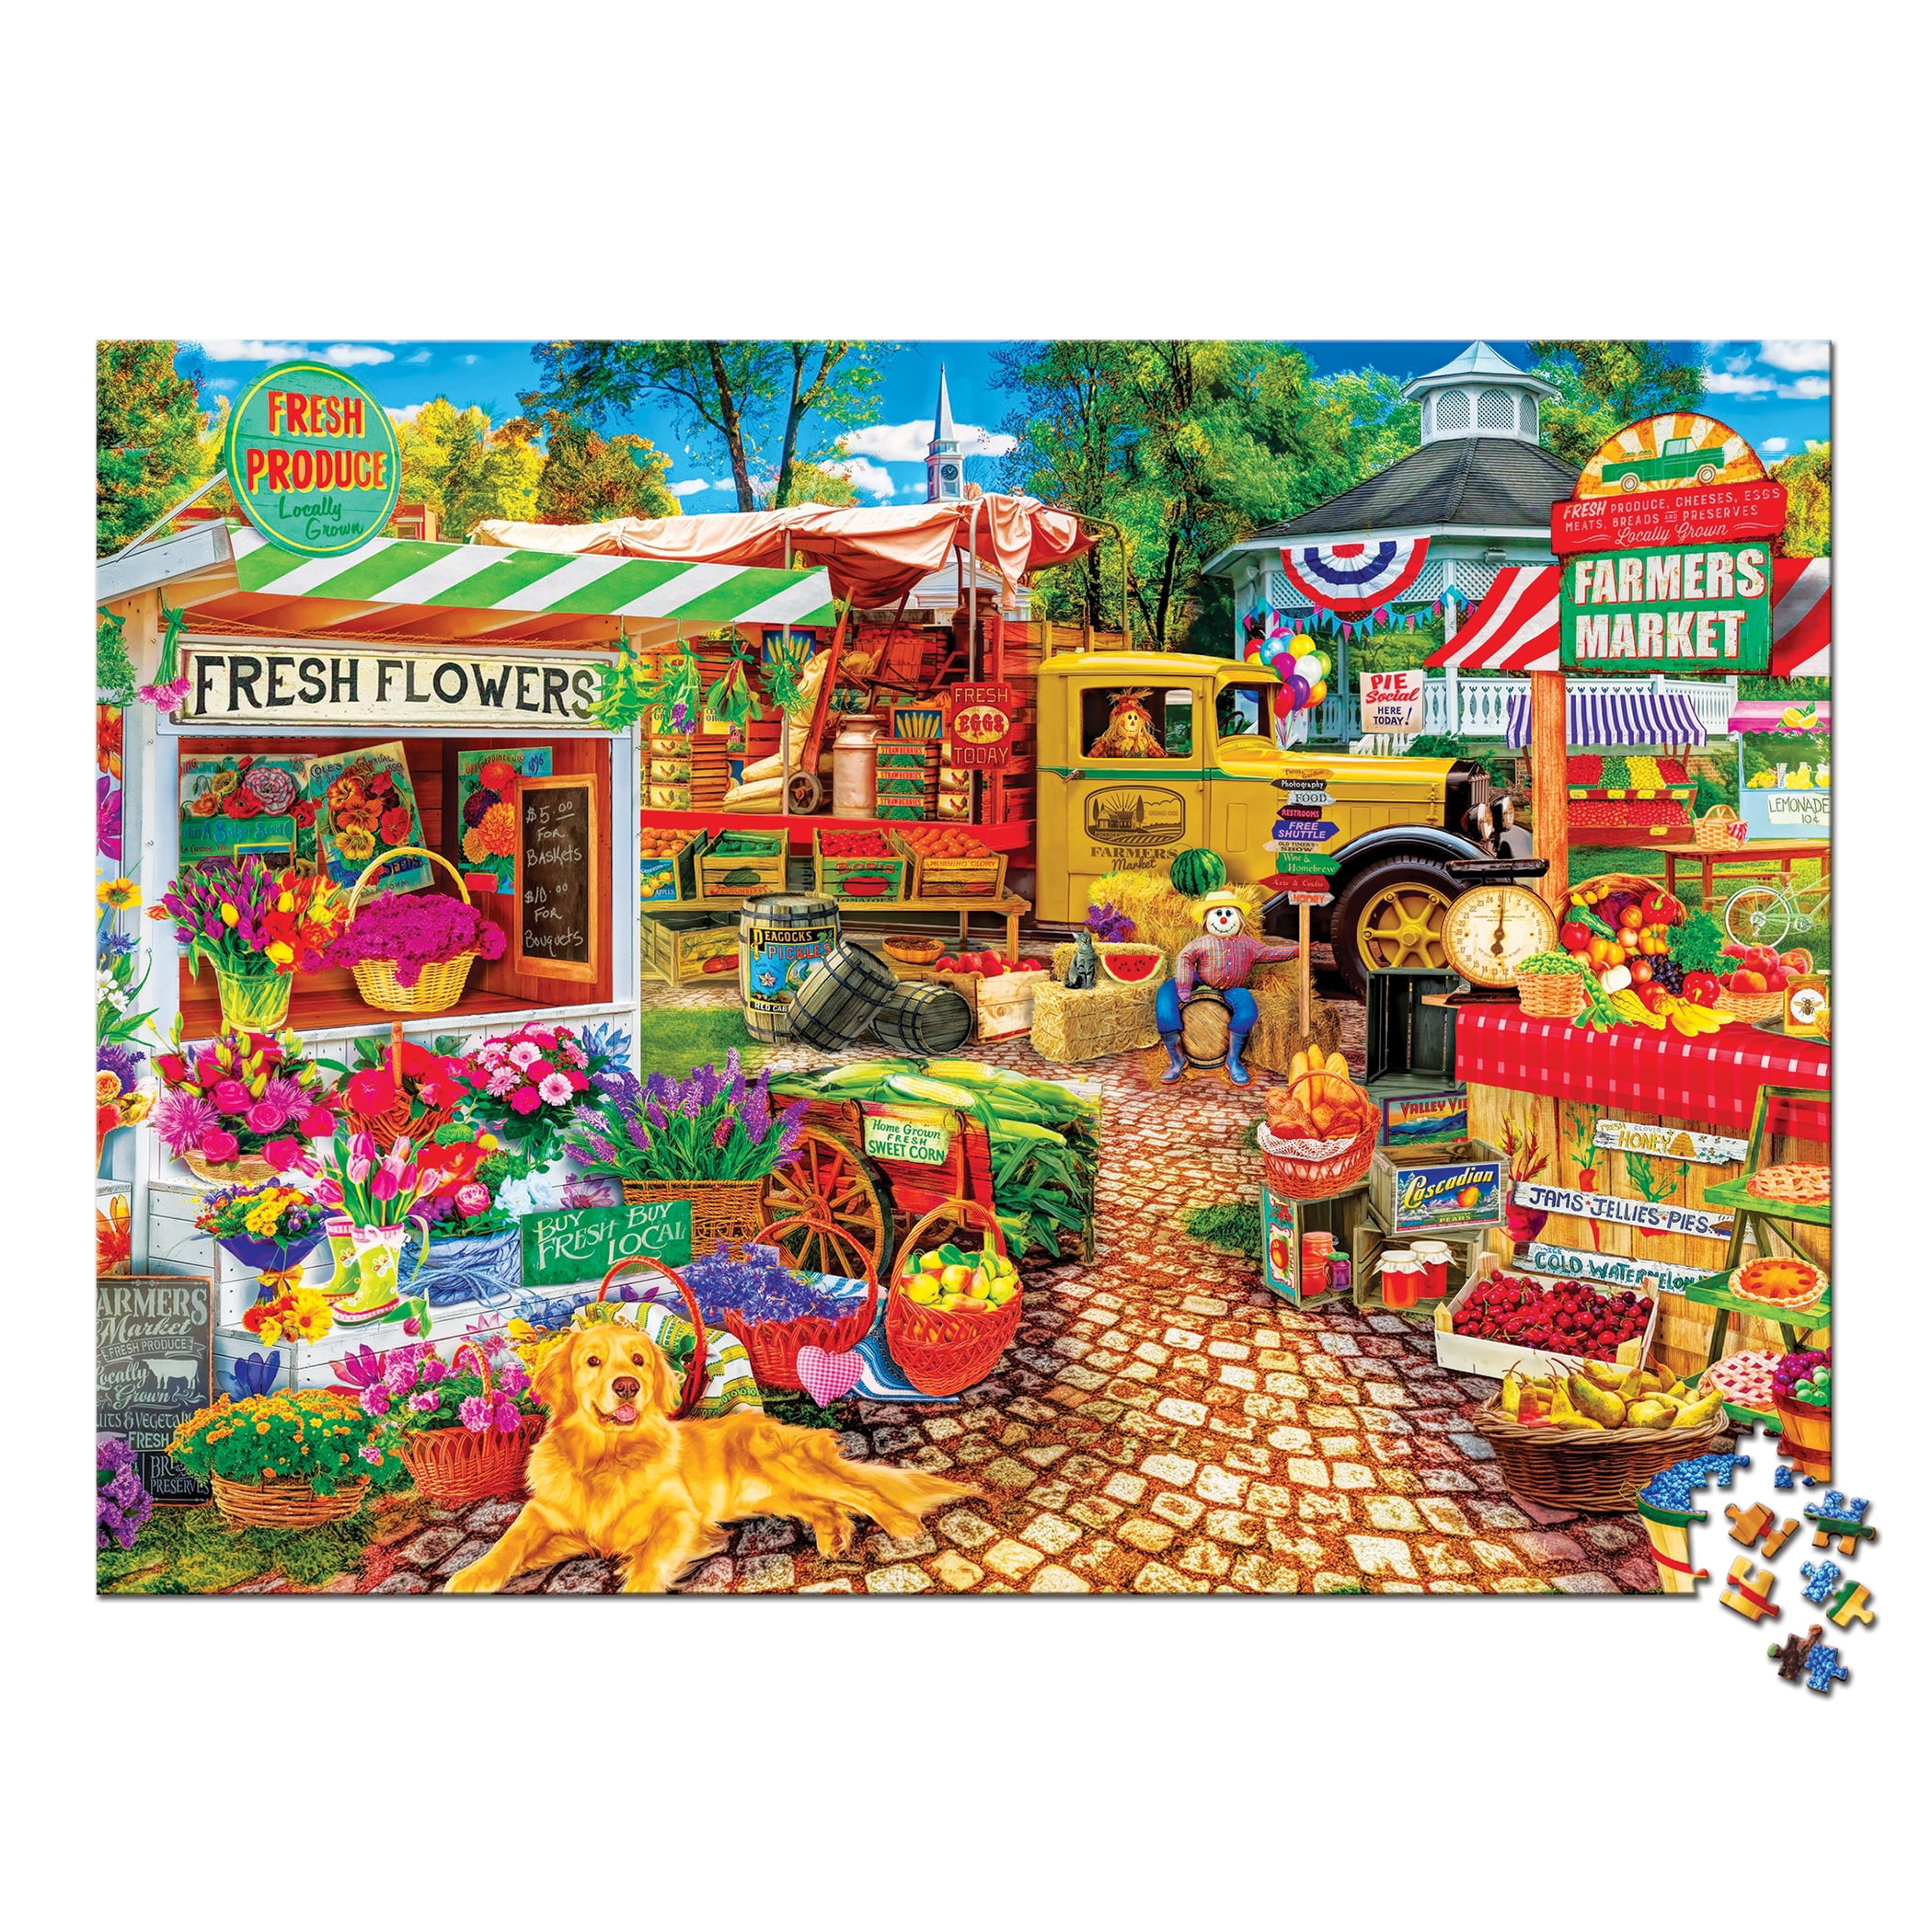 Times Square NY 750 PC Panoramic Puzzle Buffalo Games Six Feet Under for sale online 